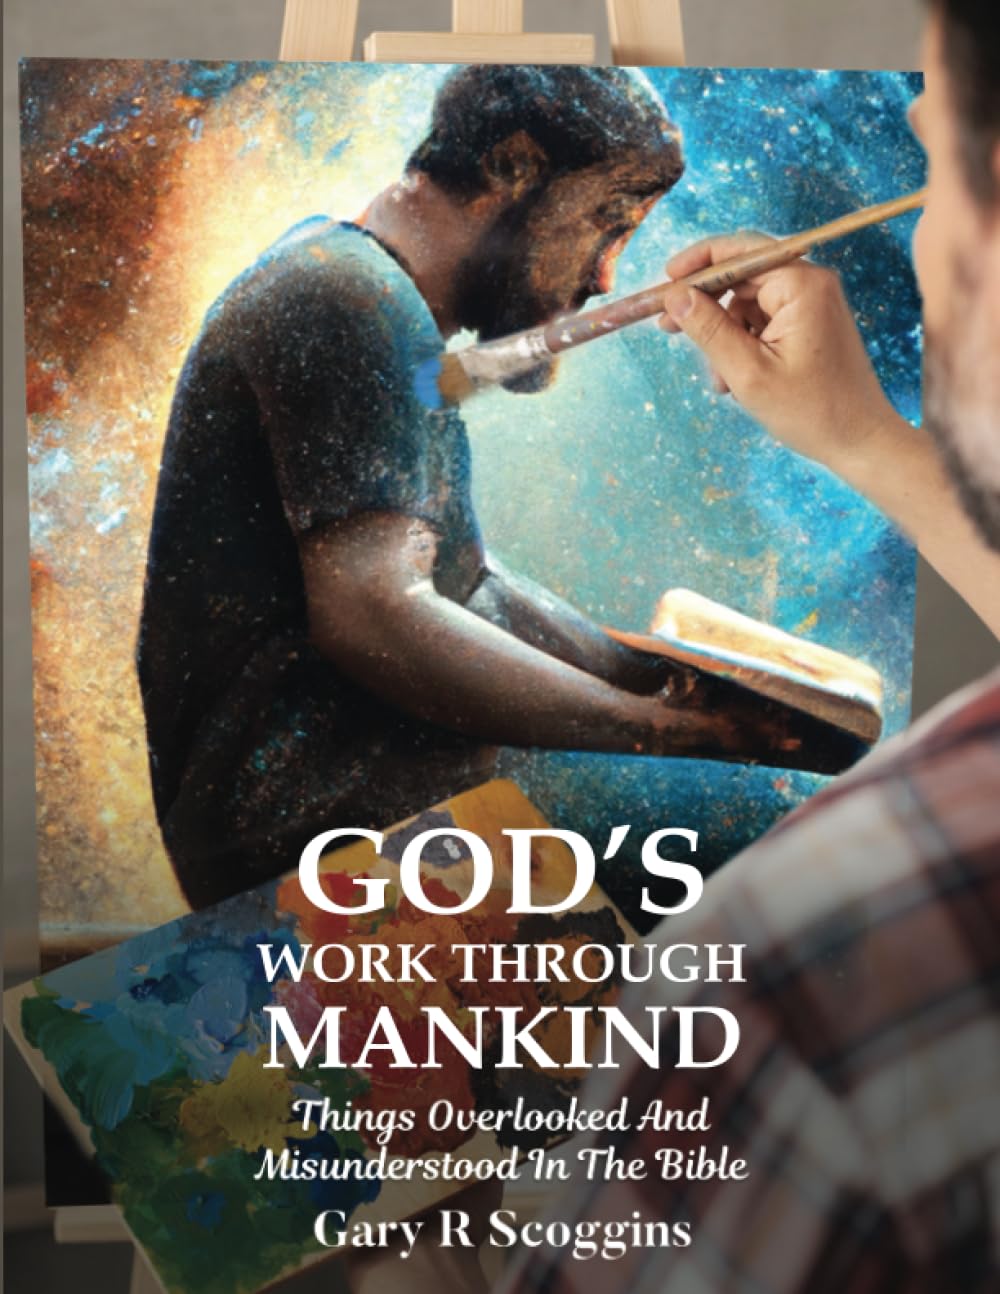 Rediscover Faith With 'God's Work Through Mankind' Unveils Hidden Gems in the Bible